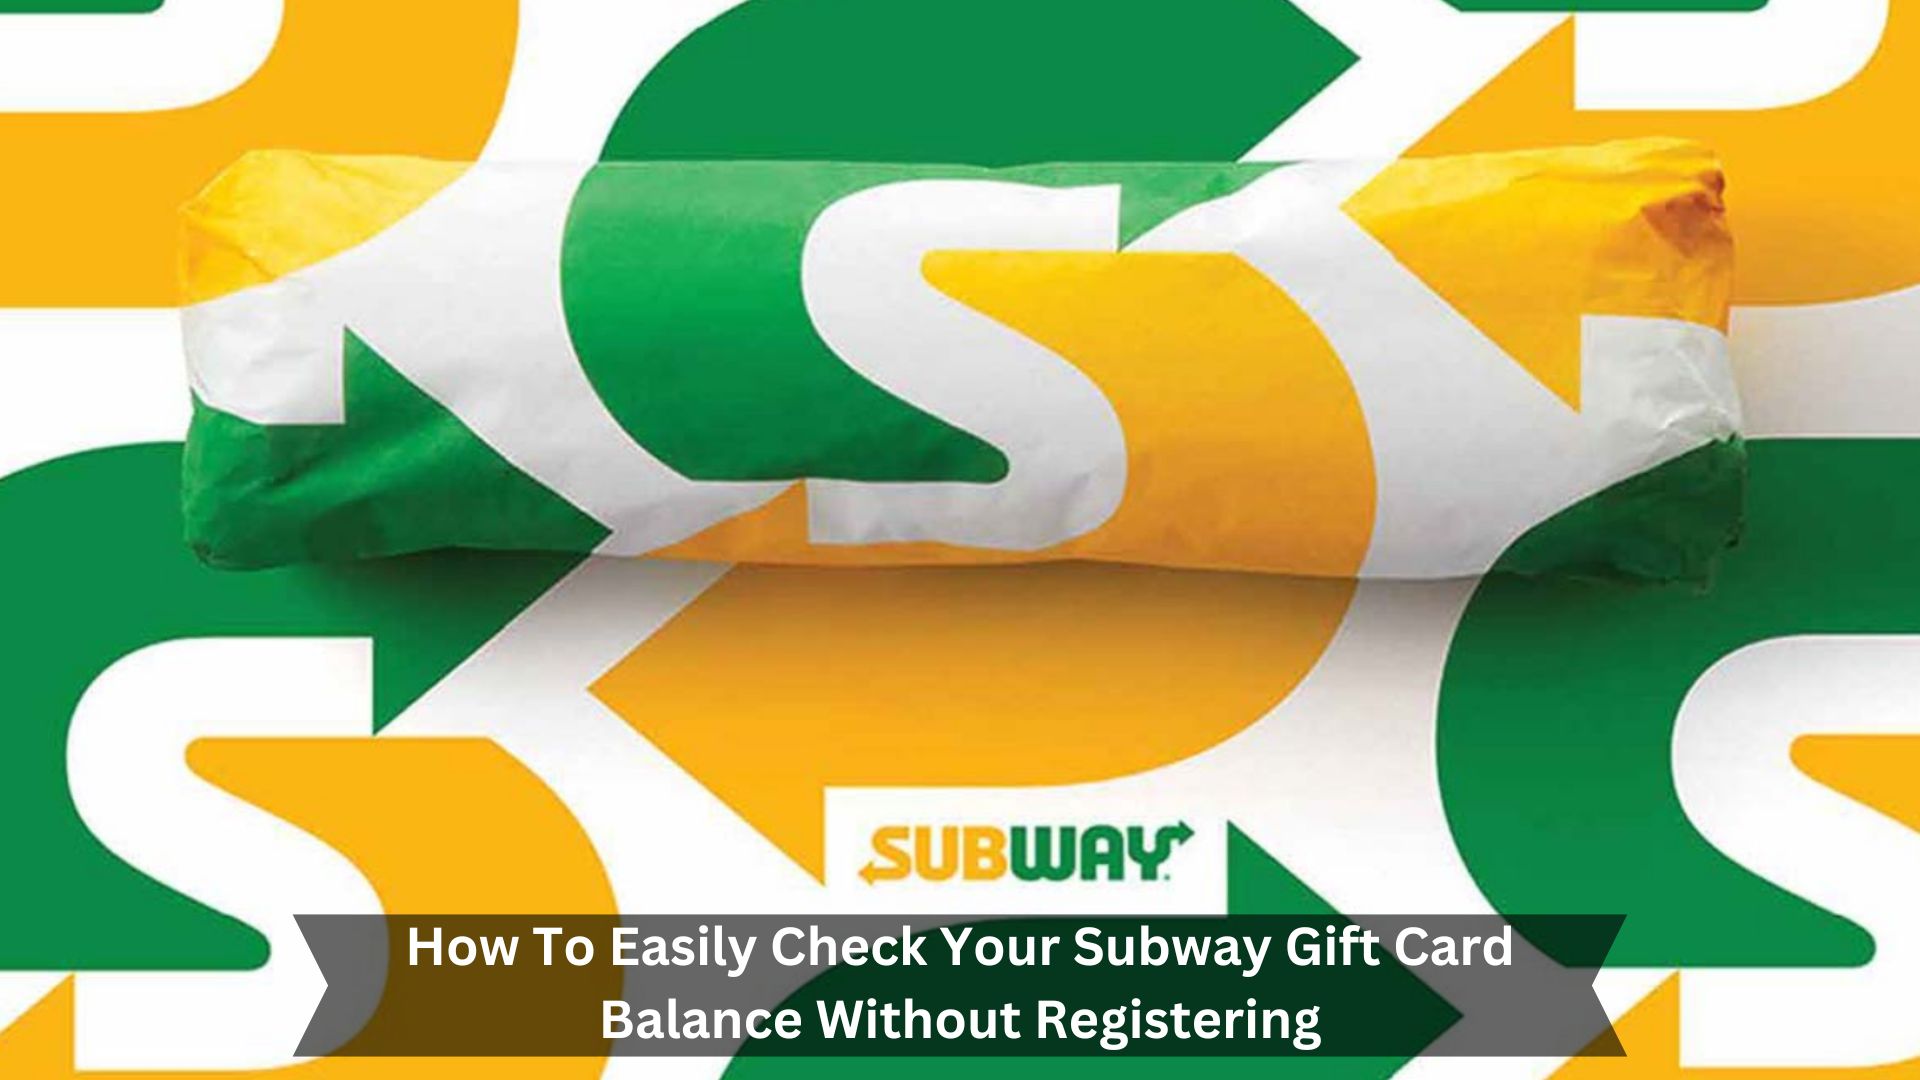 How-To-Easily-Check-Your-Subway-Gift-Card-Balance-Without-Registering